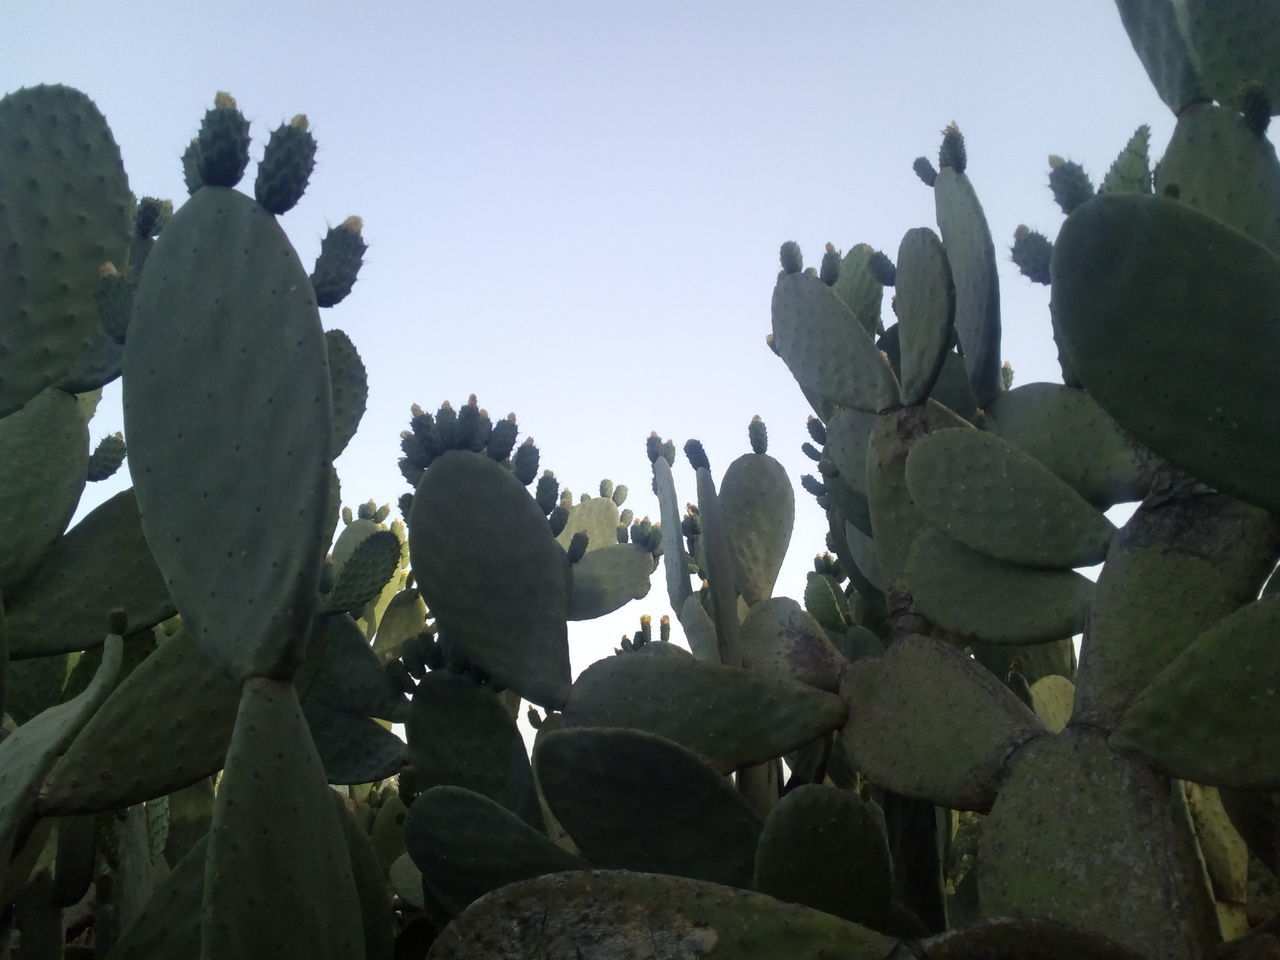 LOW ANGLE VIEW OF CACTUS GROWING AGAINST SKY